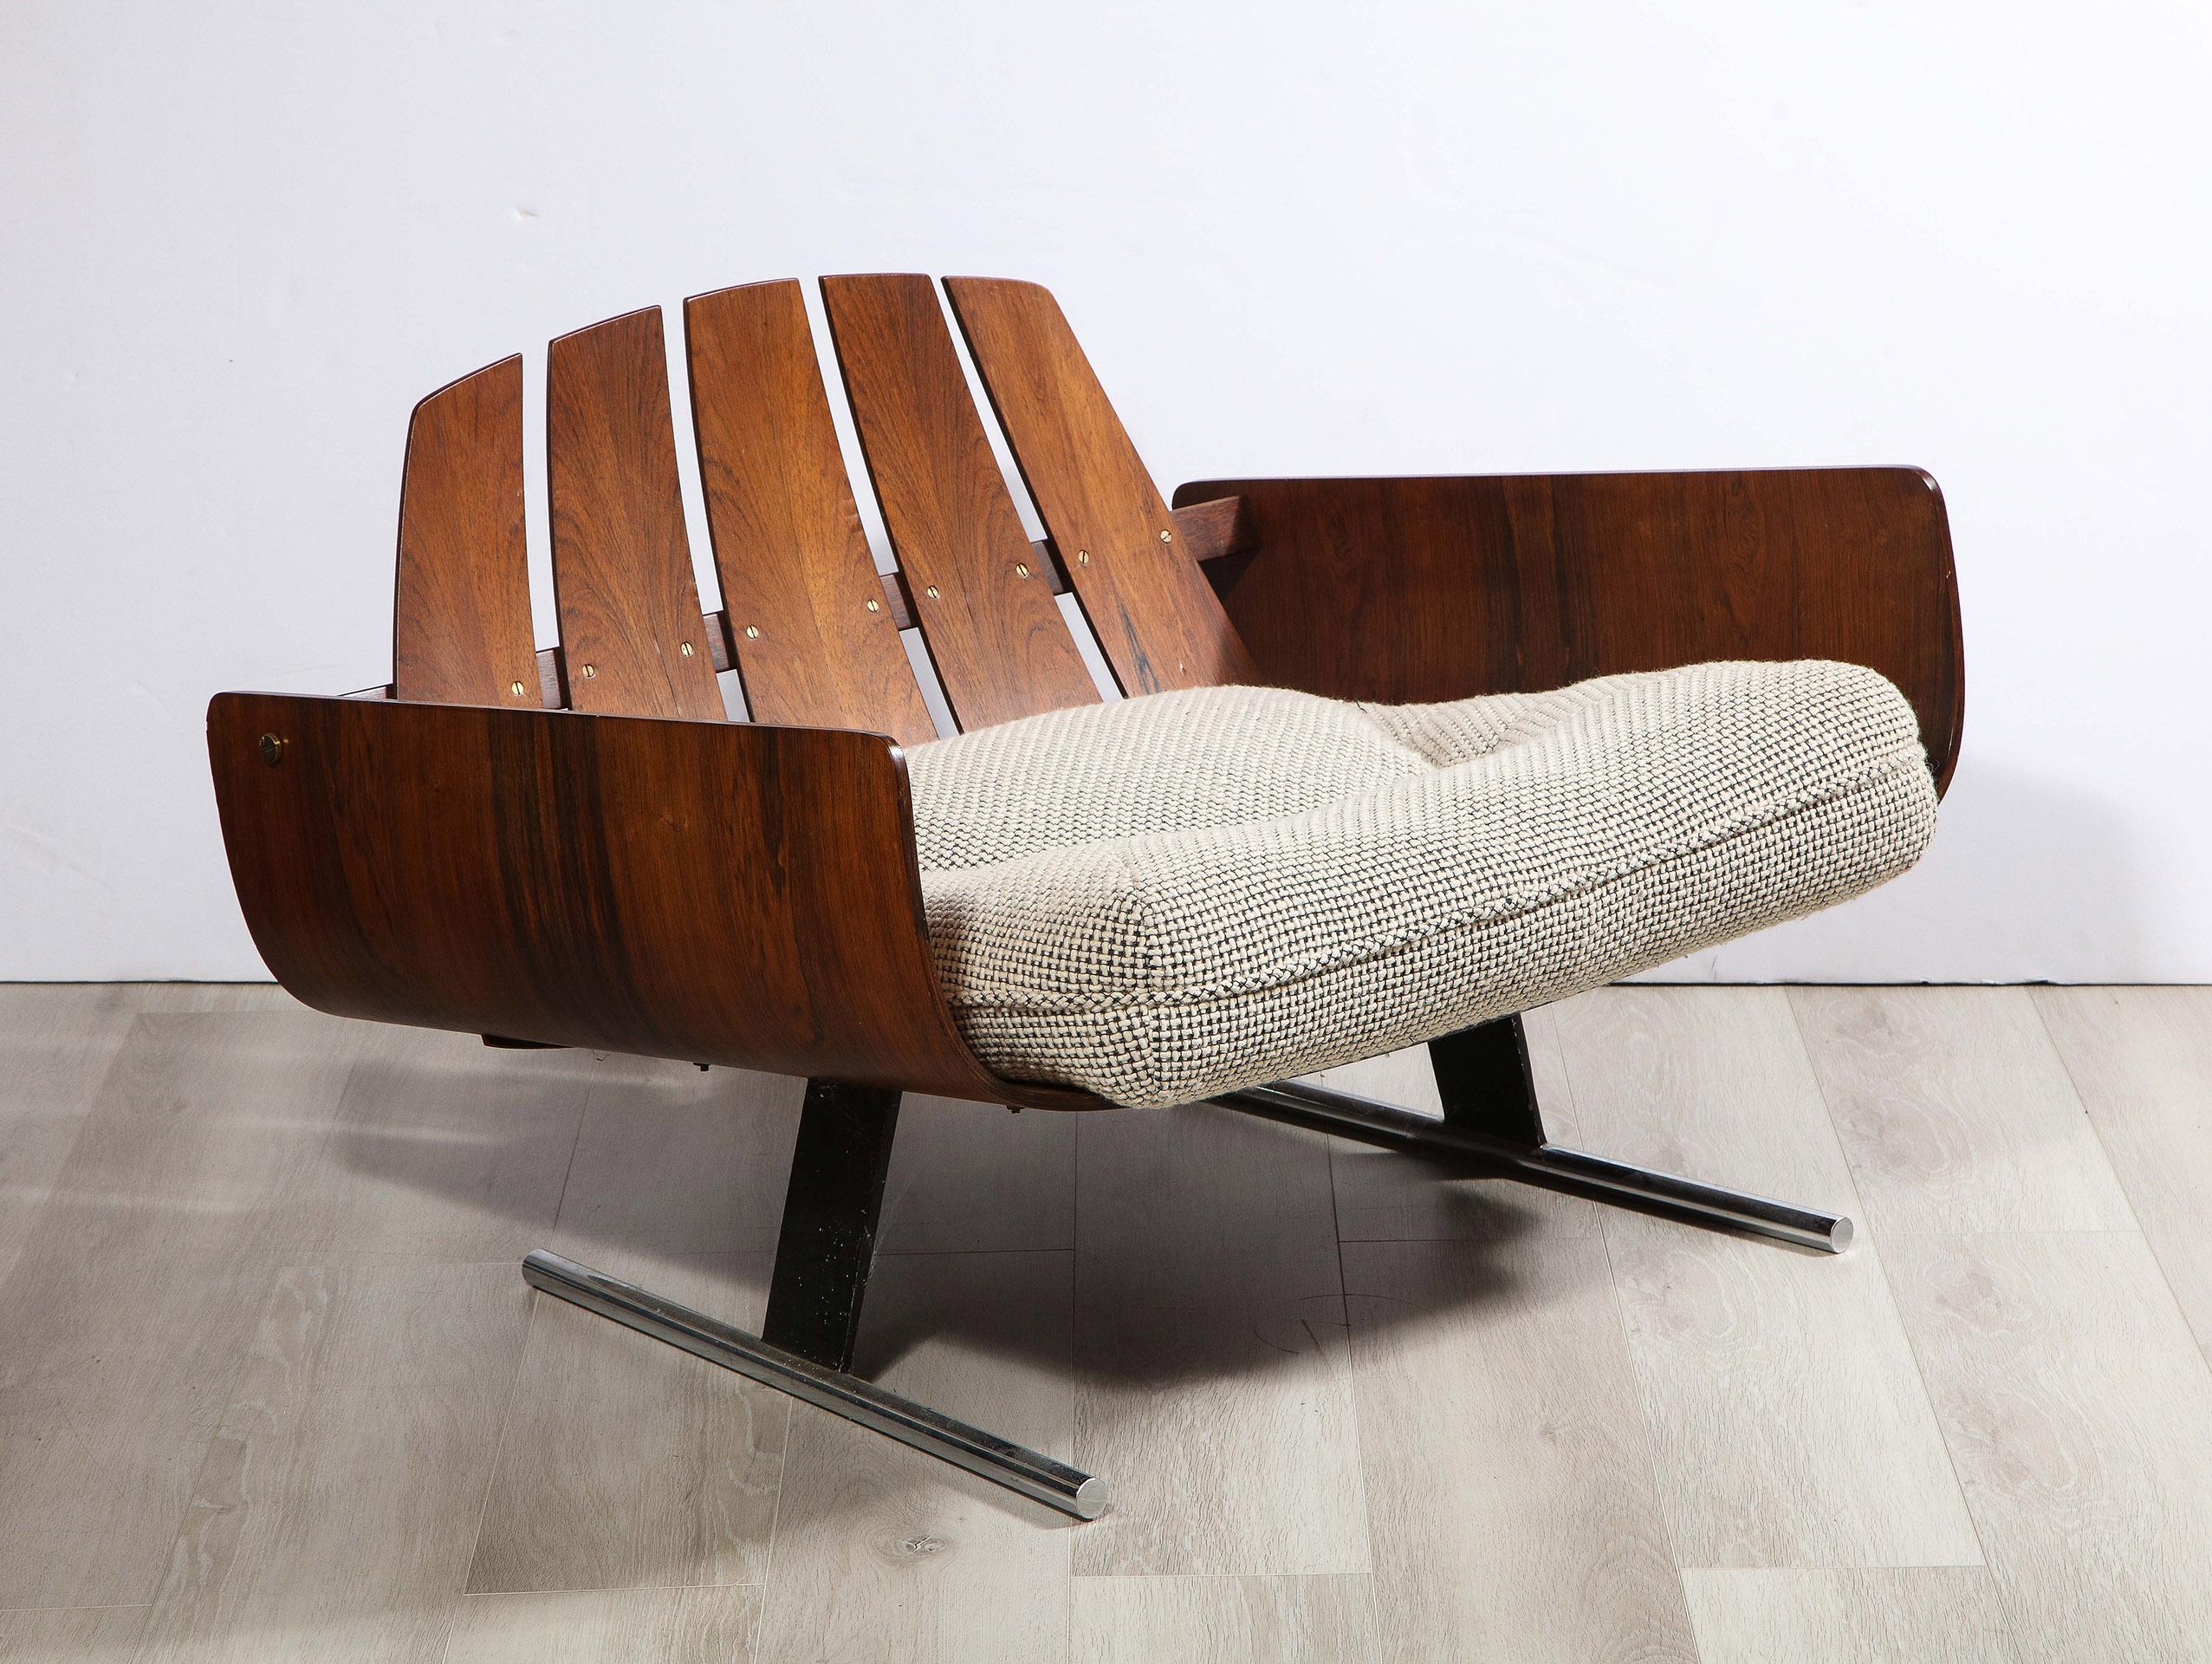 Designed by Polish-Brazilian architect and designer Jorge Zalszupin (1922 - 2022) for L'Atelier, circa 1960s. Constructed with Brazilian Jacaranda Rosewood Veneers in an unusual bentwood design, having a rosewood reinforced slat back above 